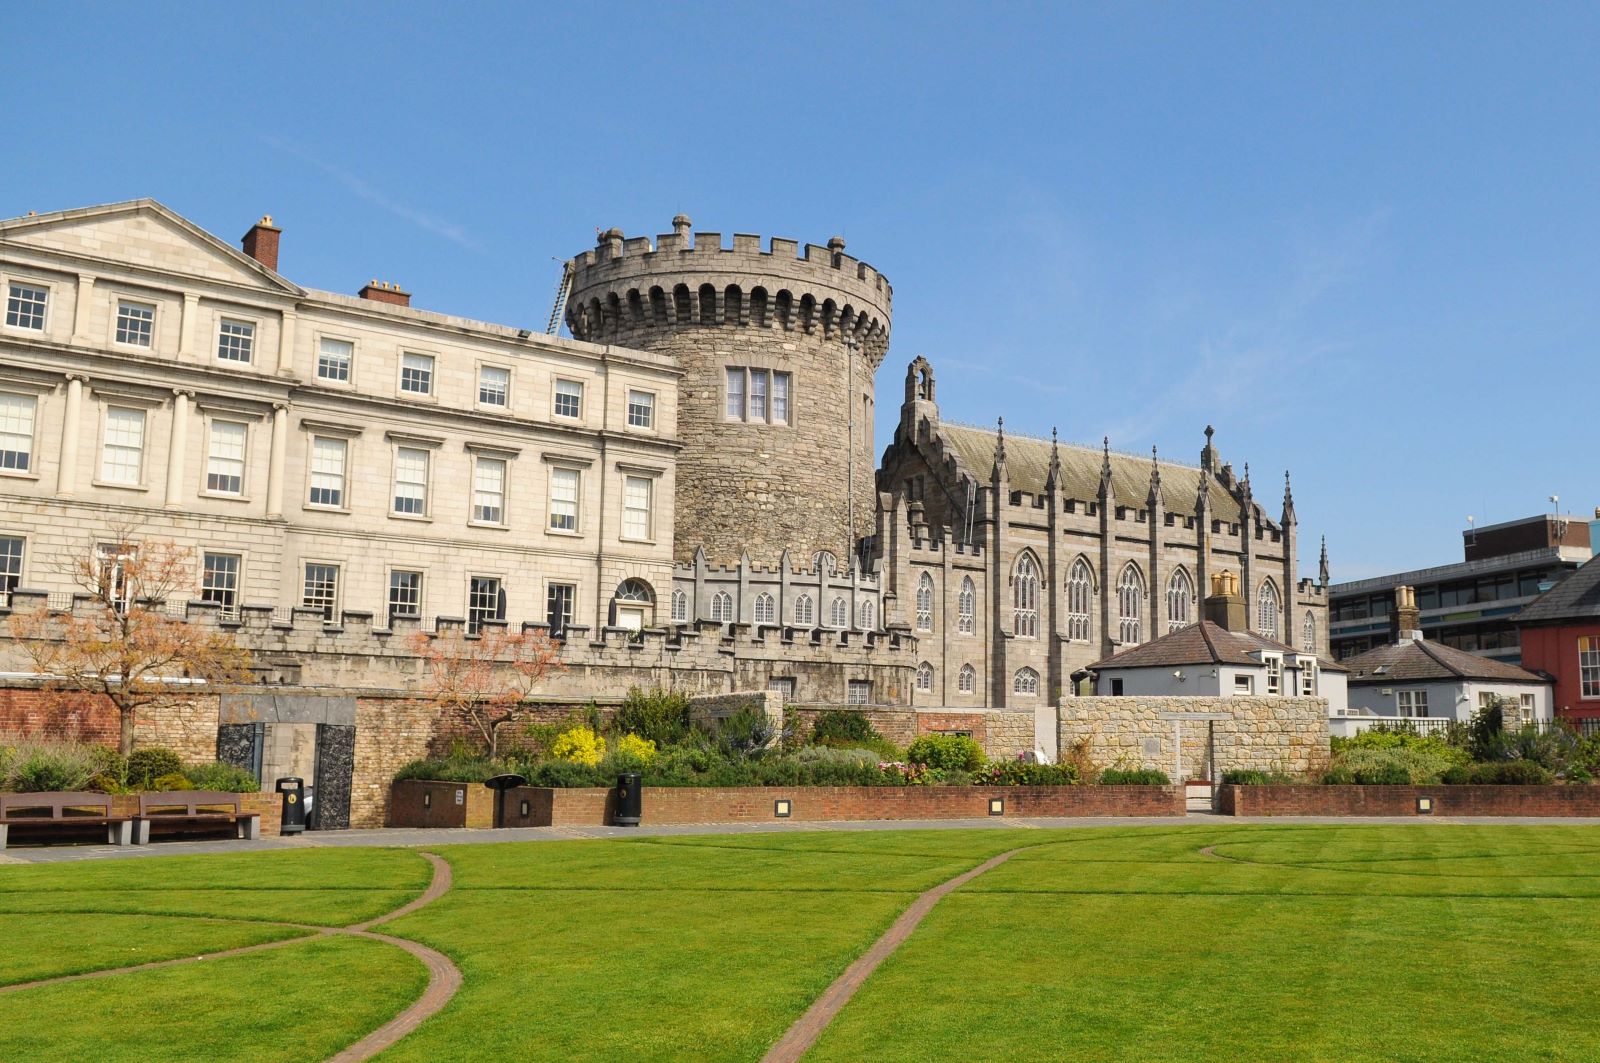 <p class="wp-caption-text">Image credit: Shutterstock / Lauren Orr</p>  <p>Explore Dublin Castle, a pivotal site in Irish history. Originally built as a defensive fortification, it now hosts prestigious State receptions and offers guided tours.</p>